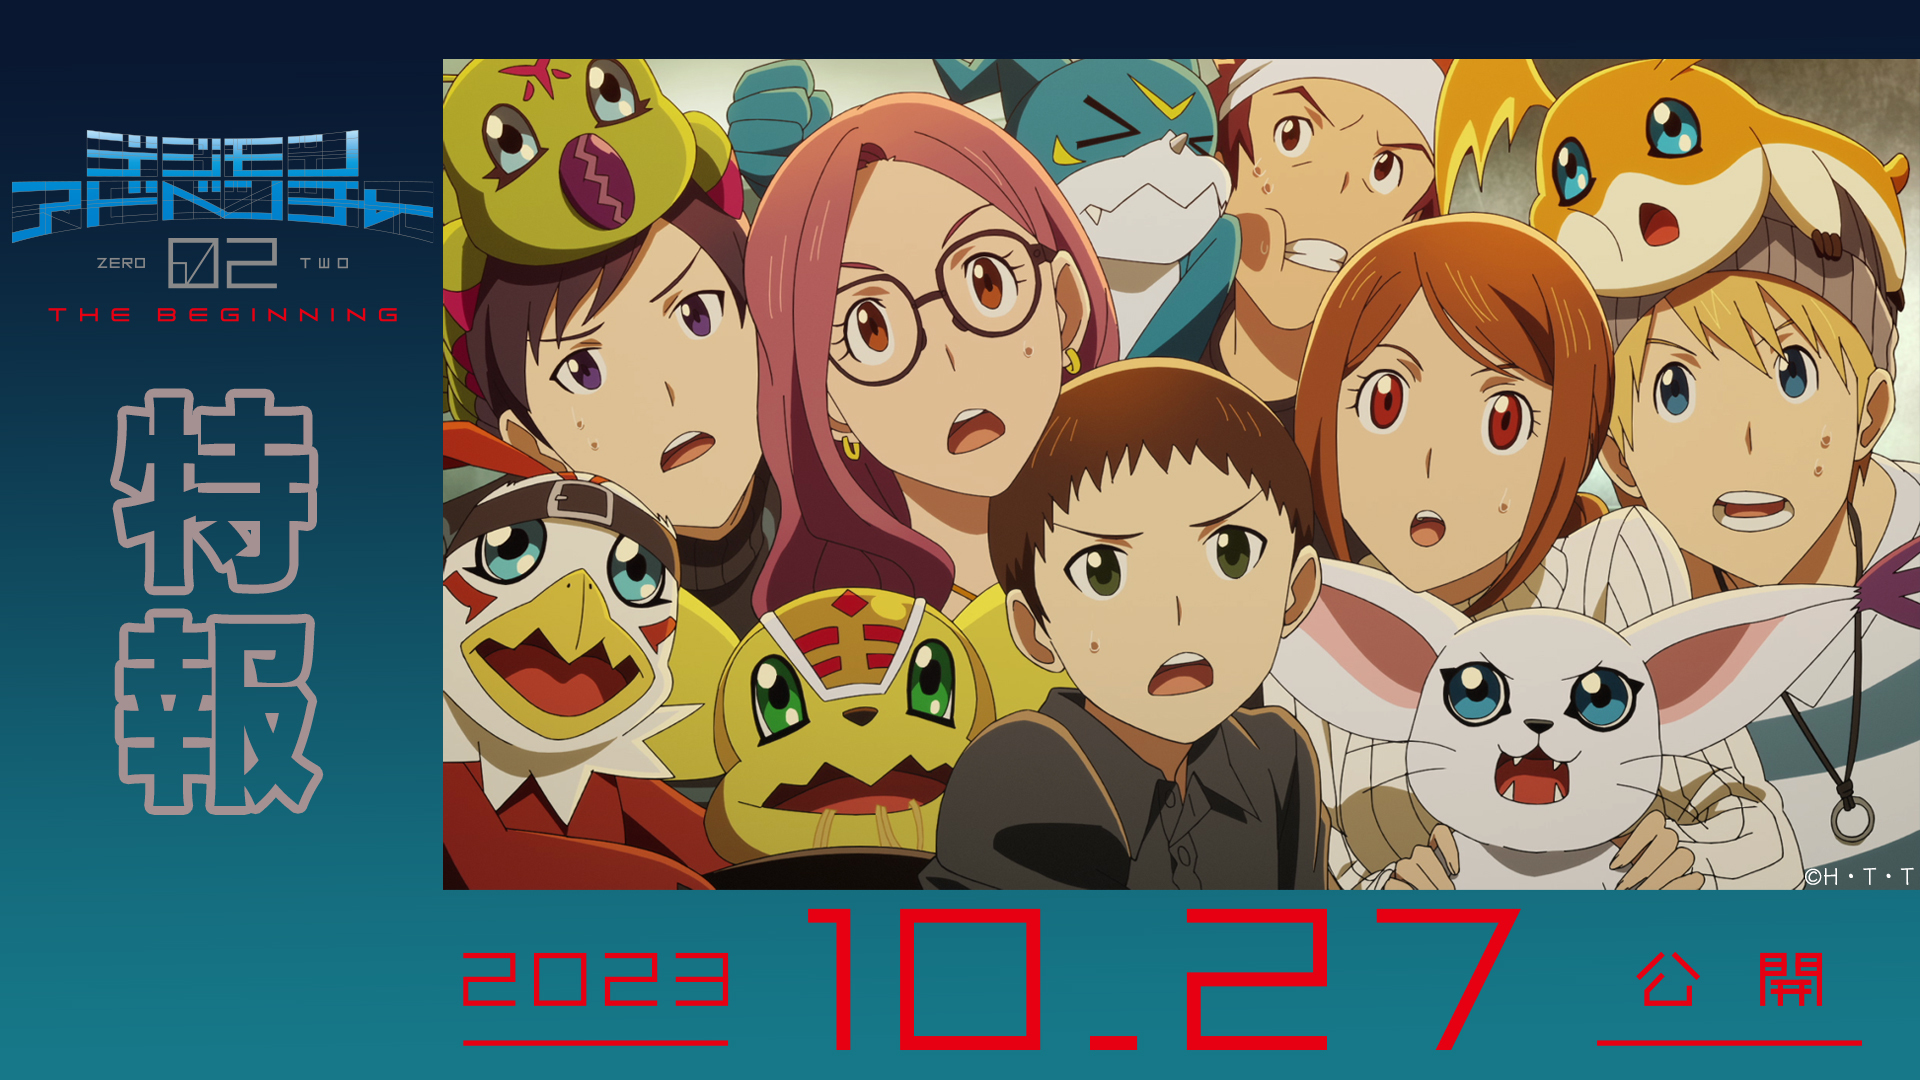 Digimon Adventure 02 the Beginning: Everything You Need to Know